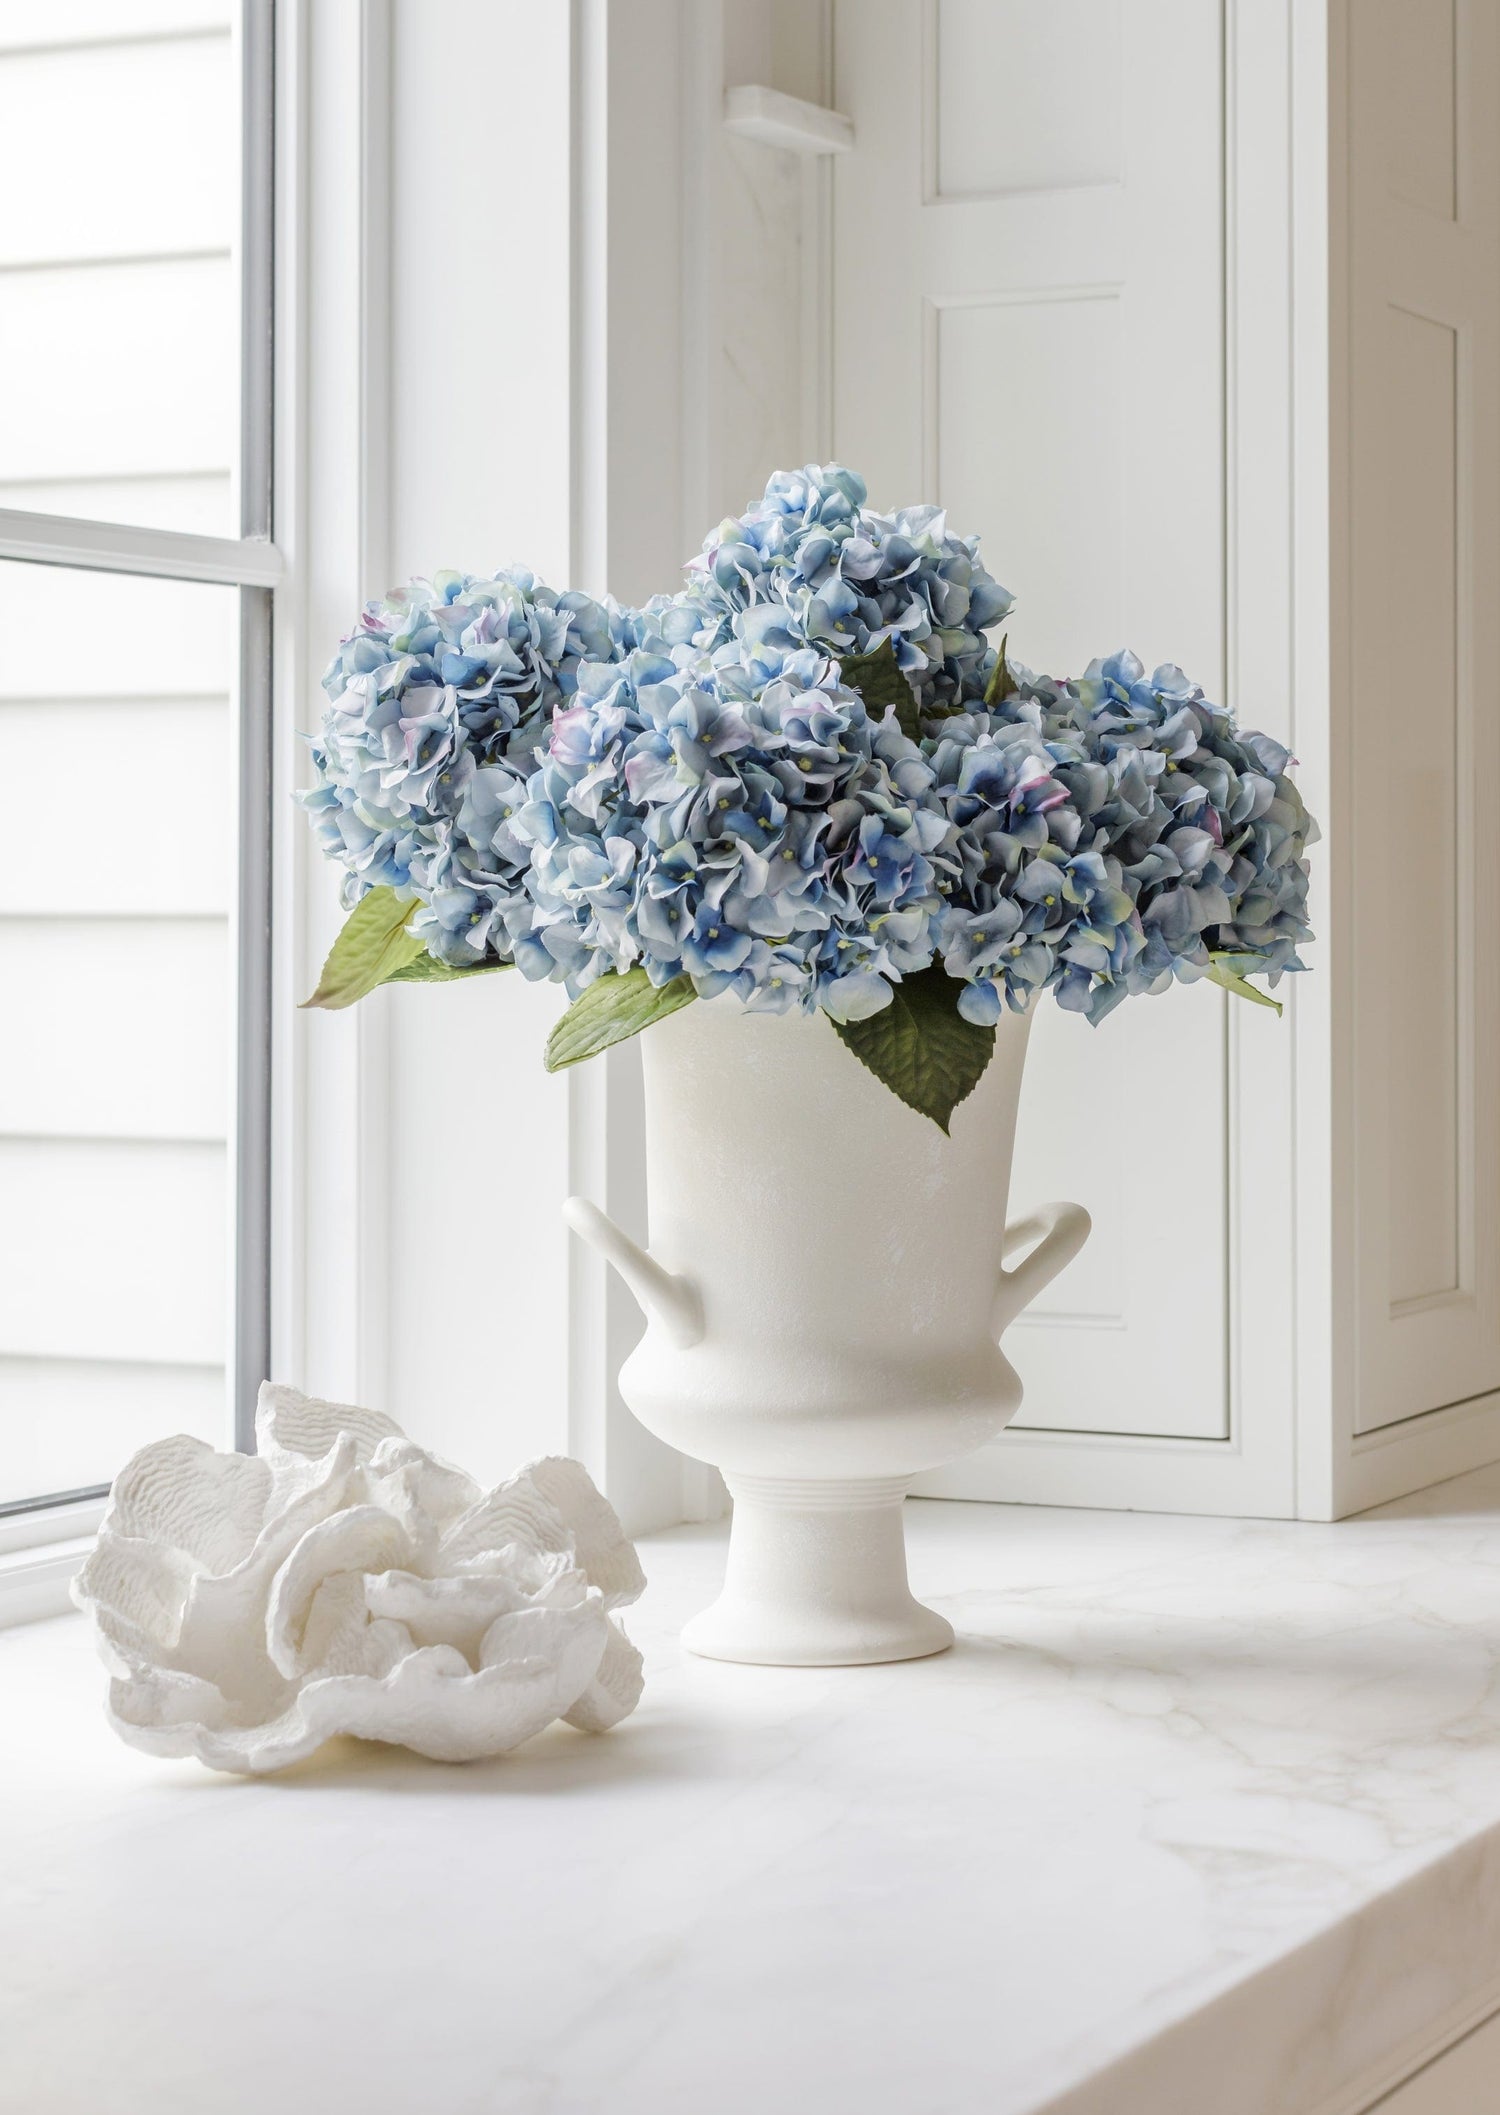 Afloral Blue Faux Hydrangeas Styled in White Urn Vase